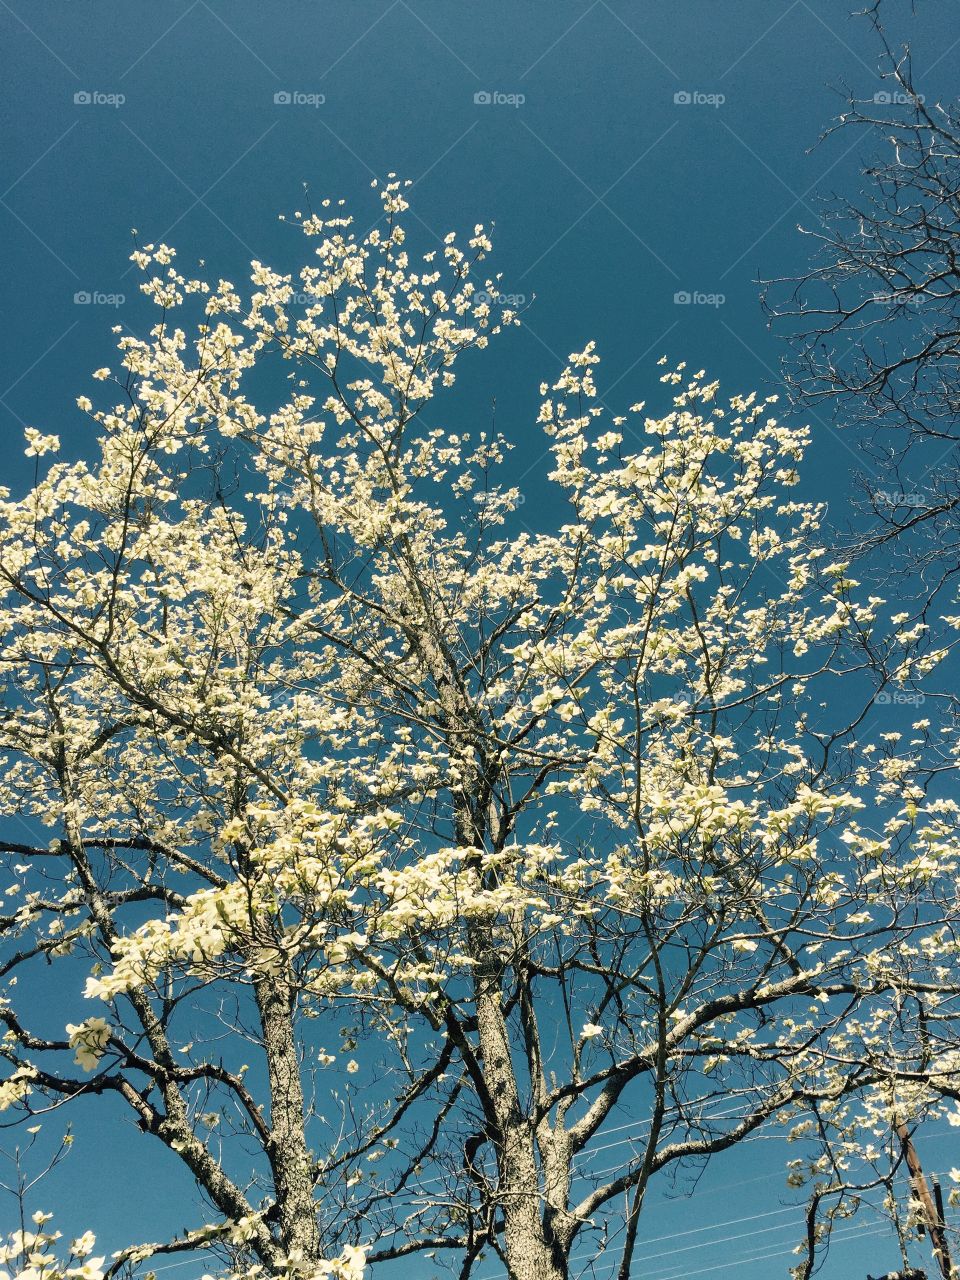 White flowering dogwood  tree in bloom against a beautiful blue sky.